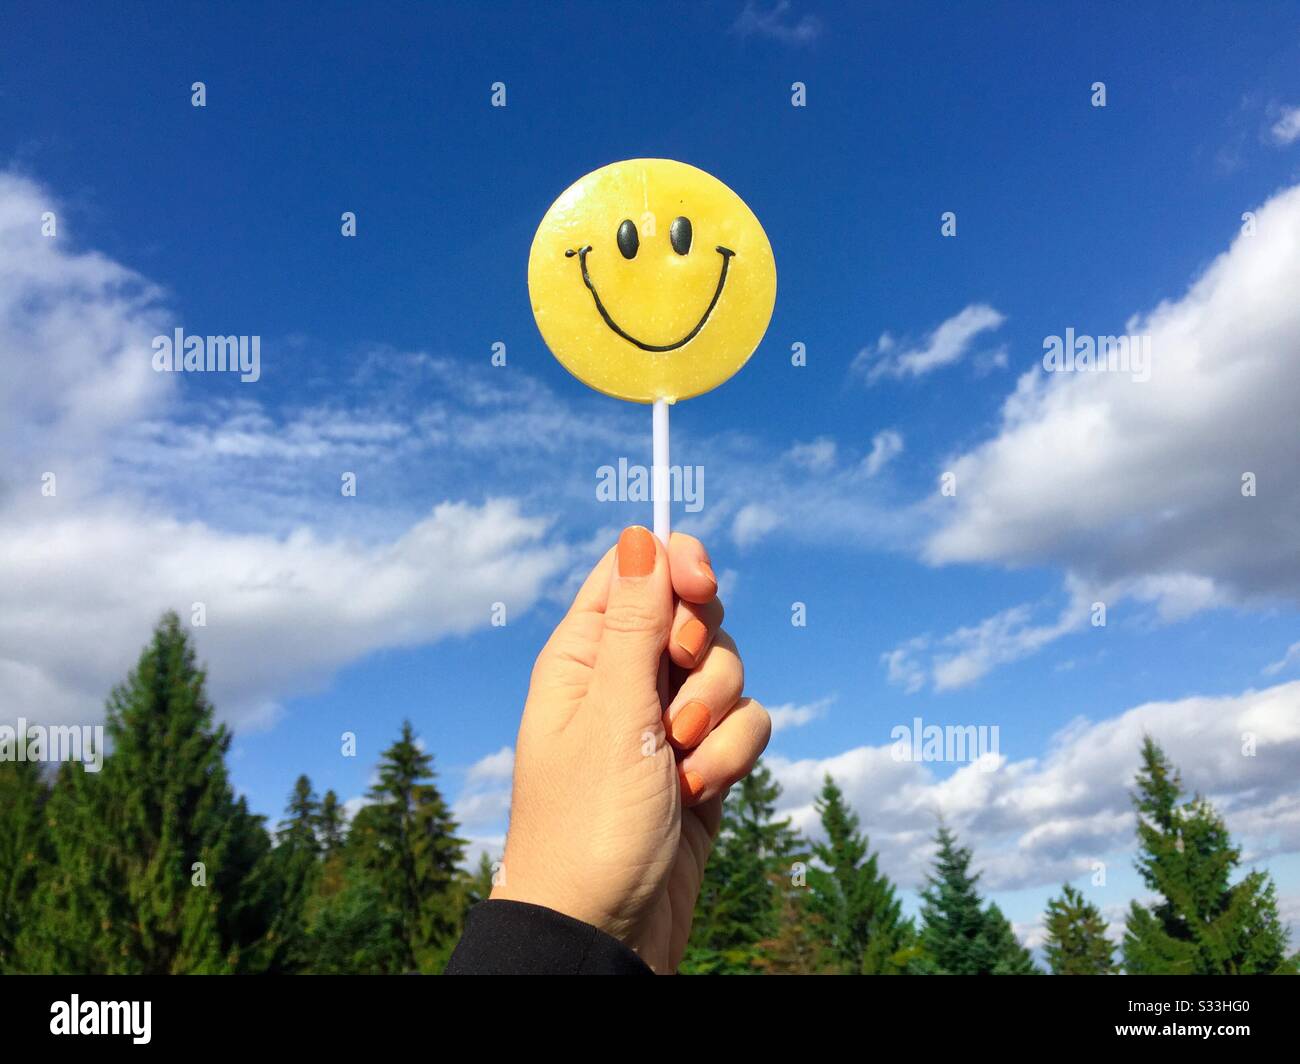 Hand holding smiley face candy against the sky Stock Photo